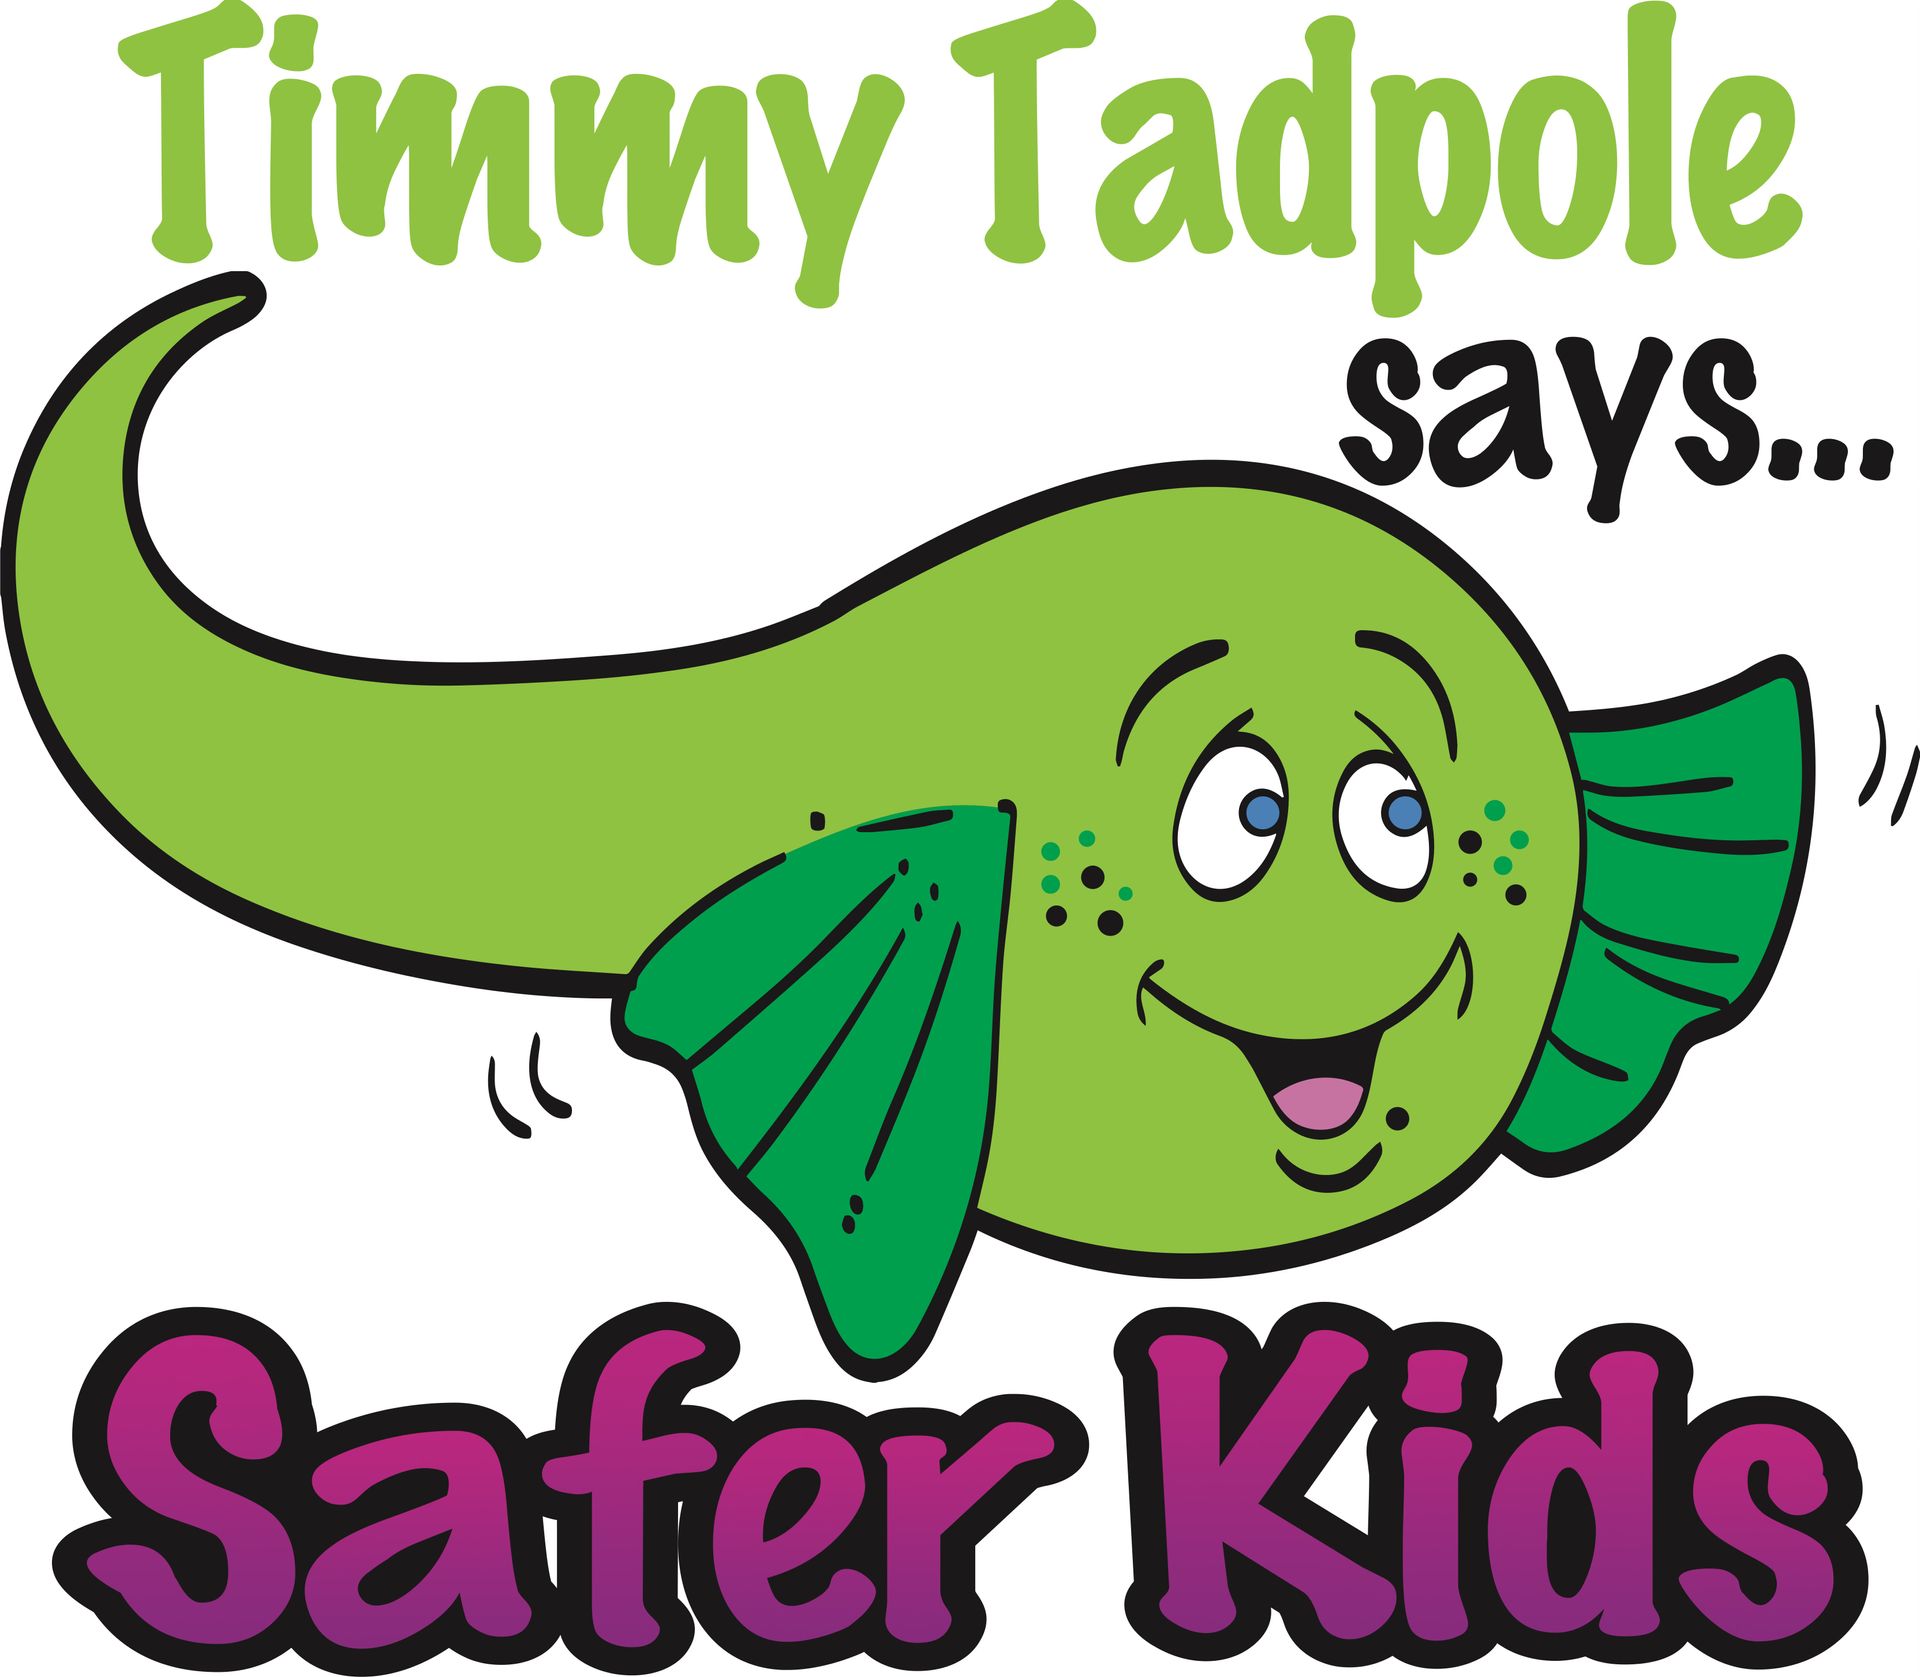 timmy tadpole says safer kids with a cartoon fish for swim lessons